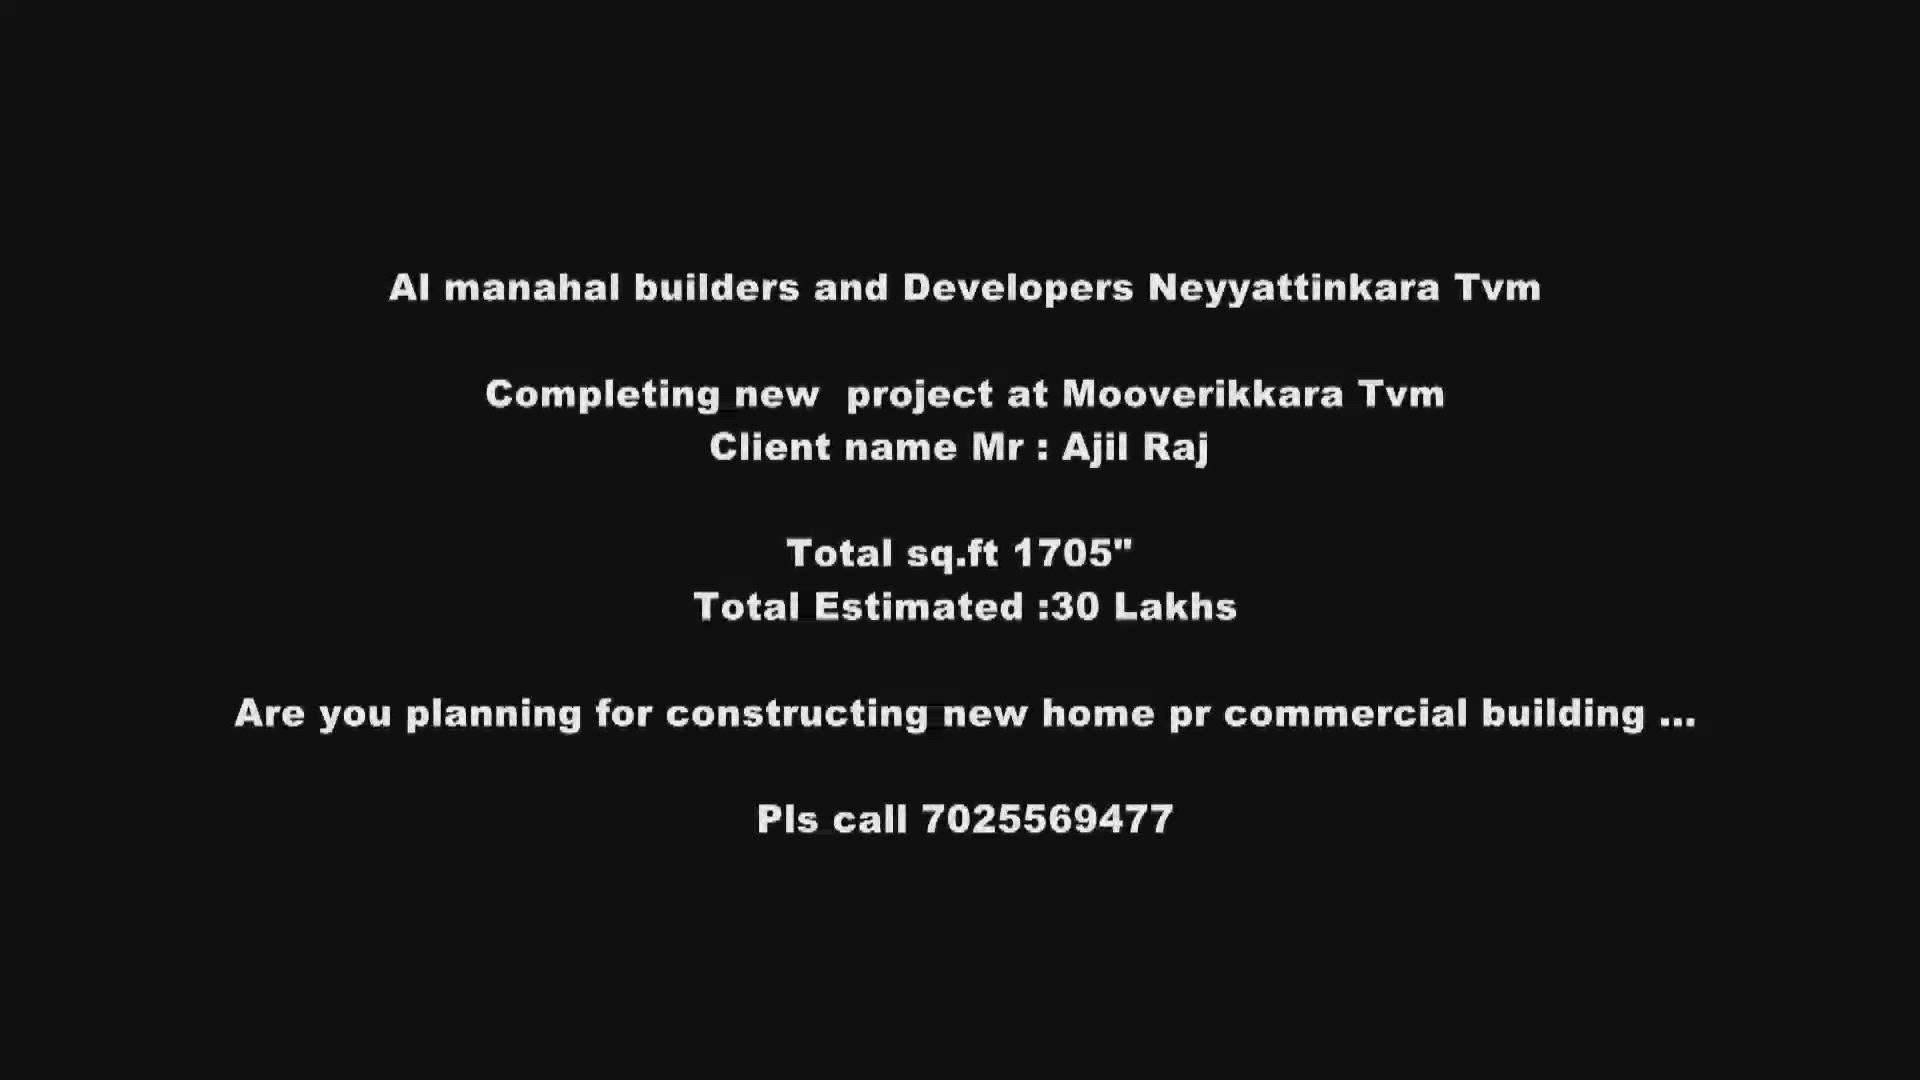 Al manahal Builders and Developers tvm, kerala
Completed Project At Mooverikkara Tvm ...
Work Type : Normal Construction
Call for fullfill your dreams 
Sq.ft rate starts Based on your Requirements 
7025569477